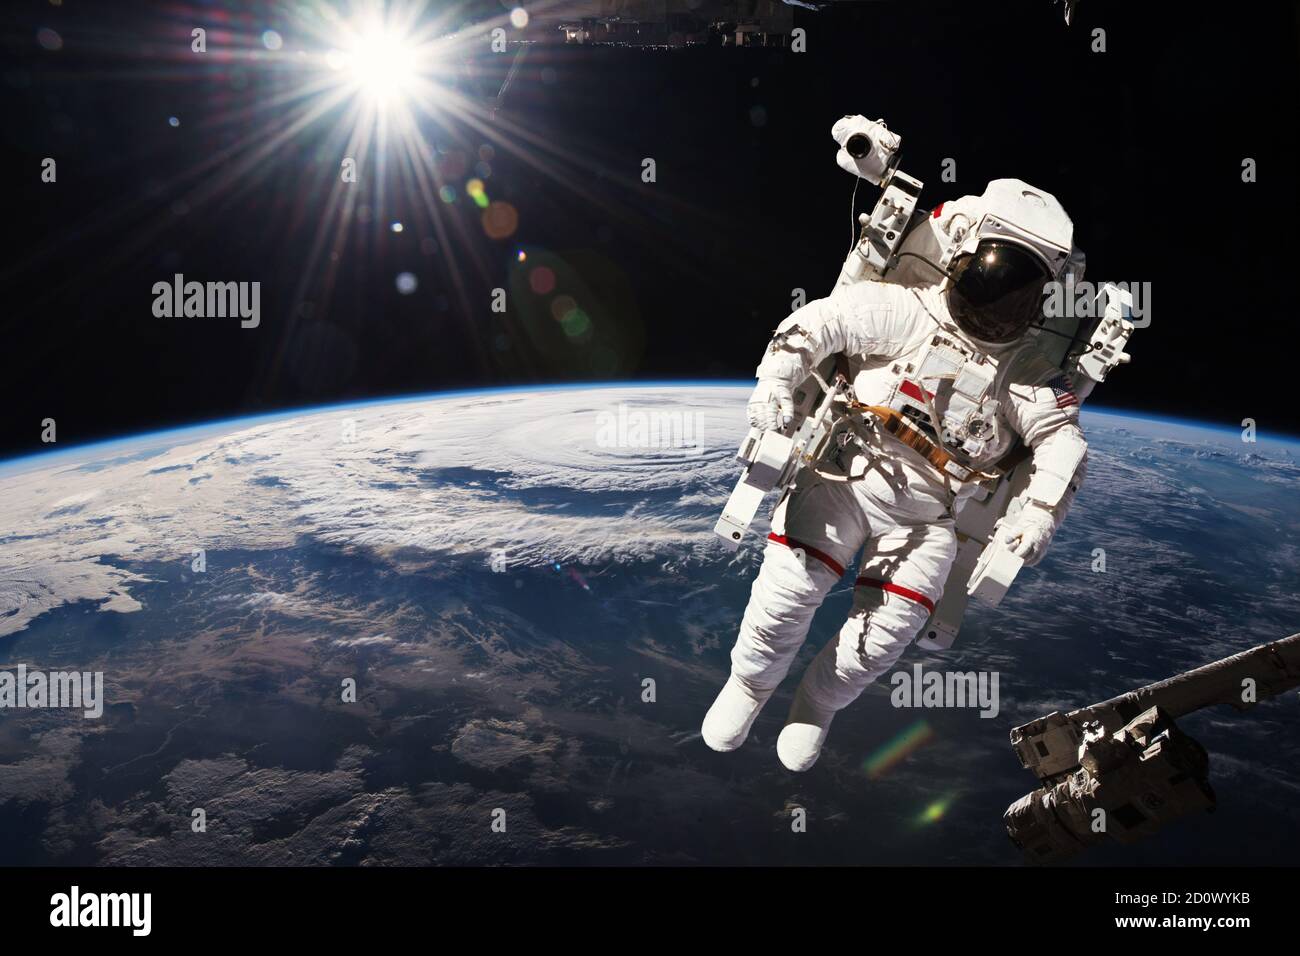 Astronaut walking in space with earth background. Elements of this image furnished by NASA. Stock Photo